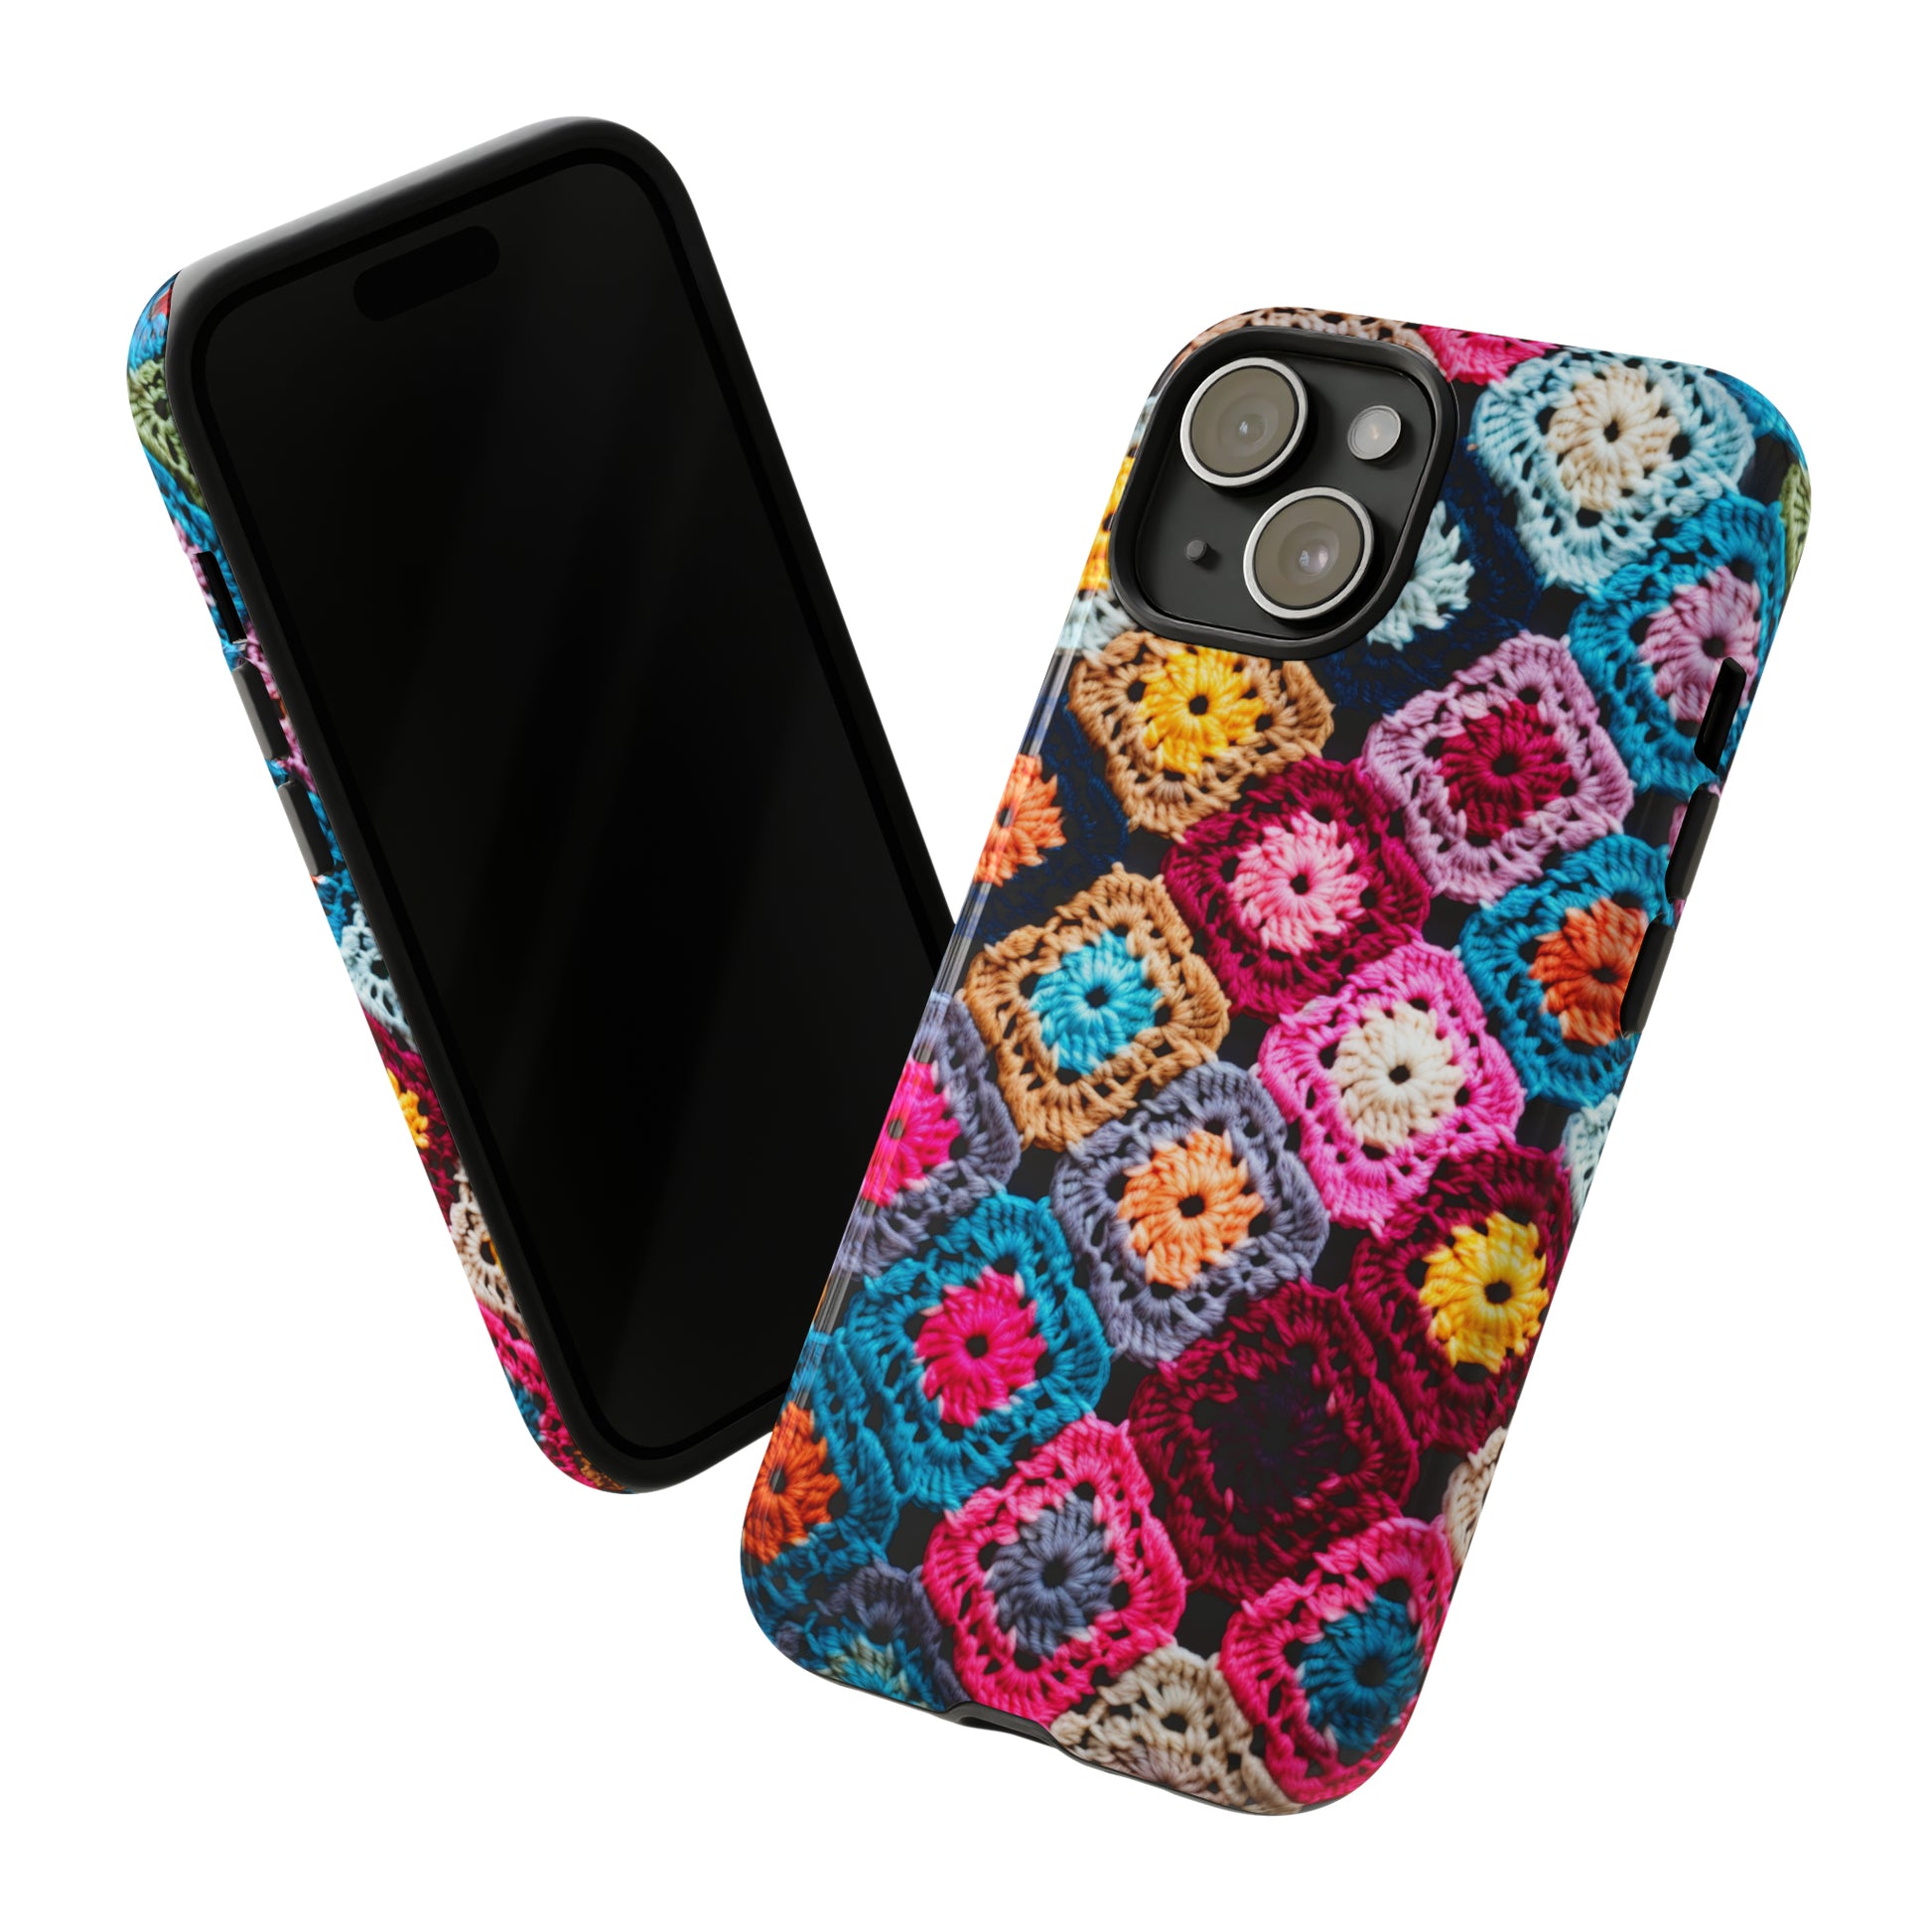 Handcrafted knit look cover for Samsung smartphones